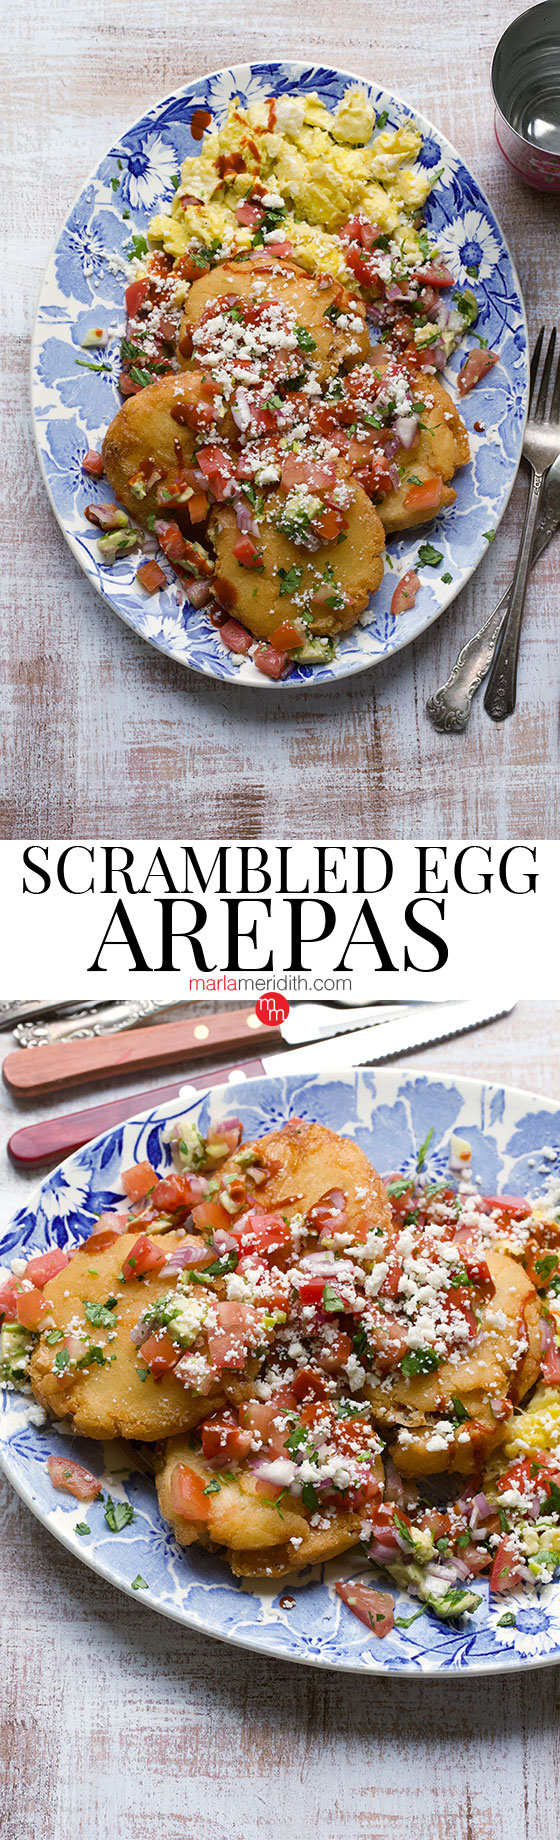 Scrambled Egg Arepa, a South American recipe you need to try! MarlaMeridith.com